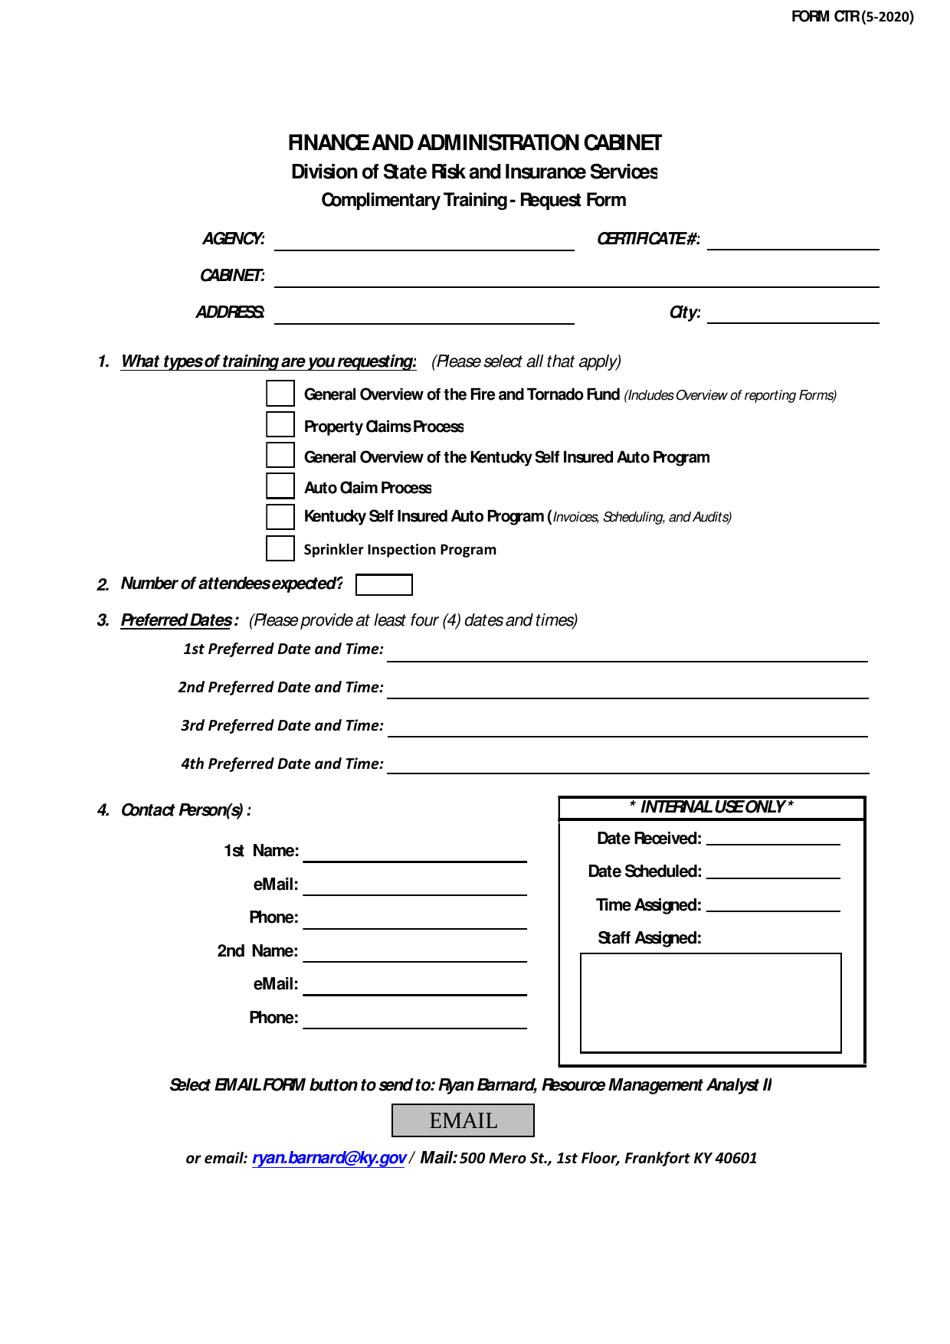 Form CTR Complimentary Training Request Form - Kentucky, Page 1